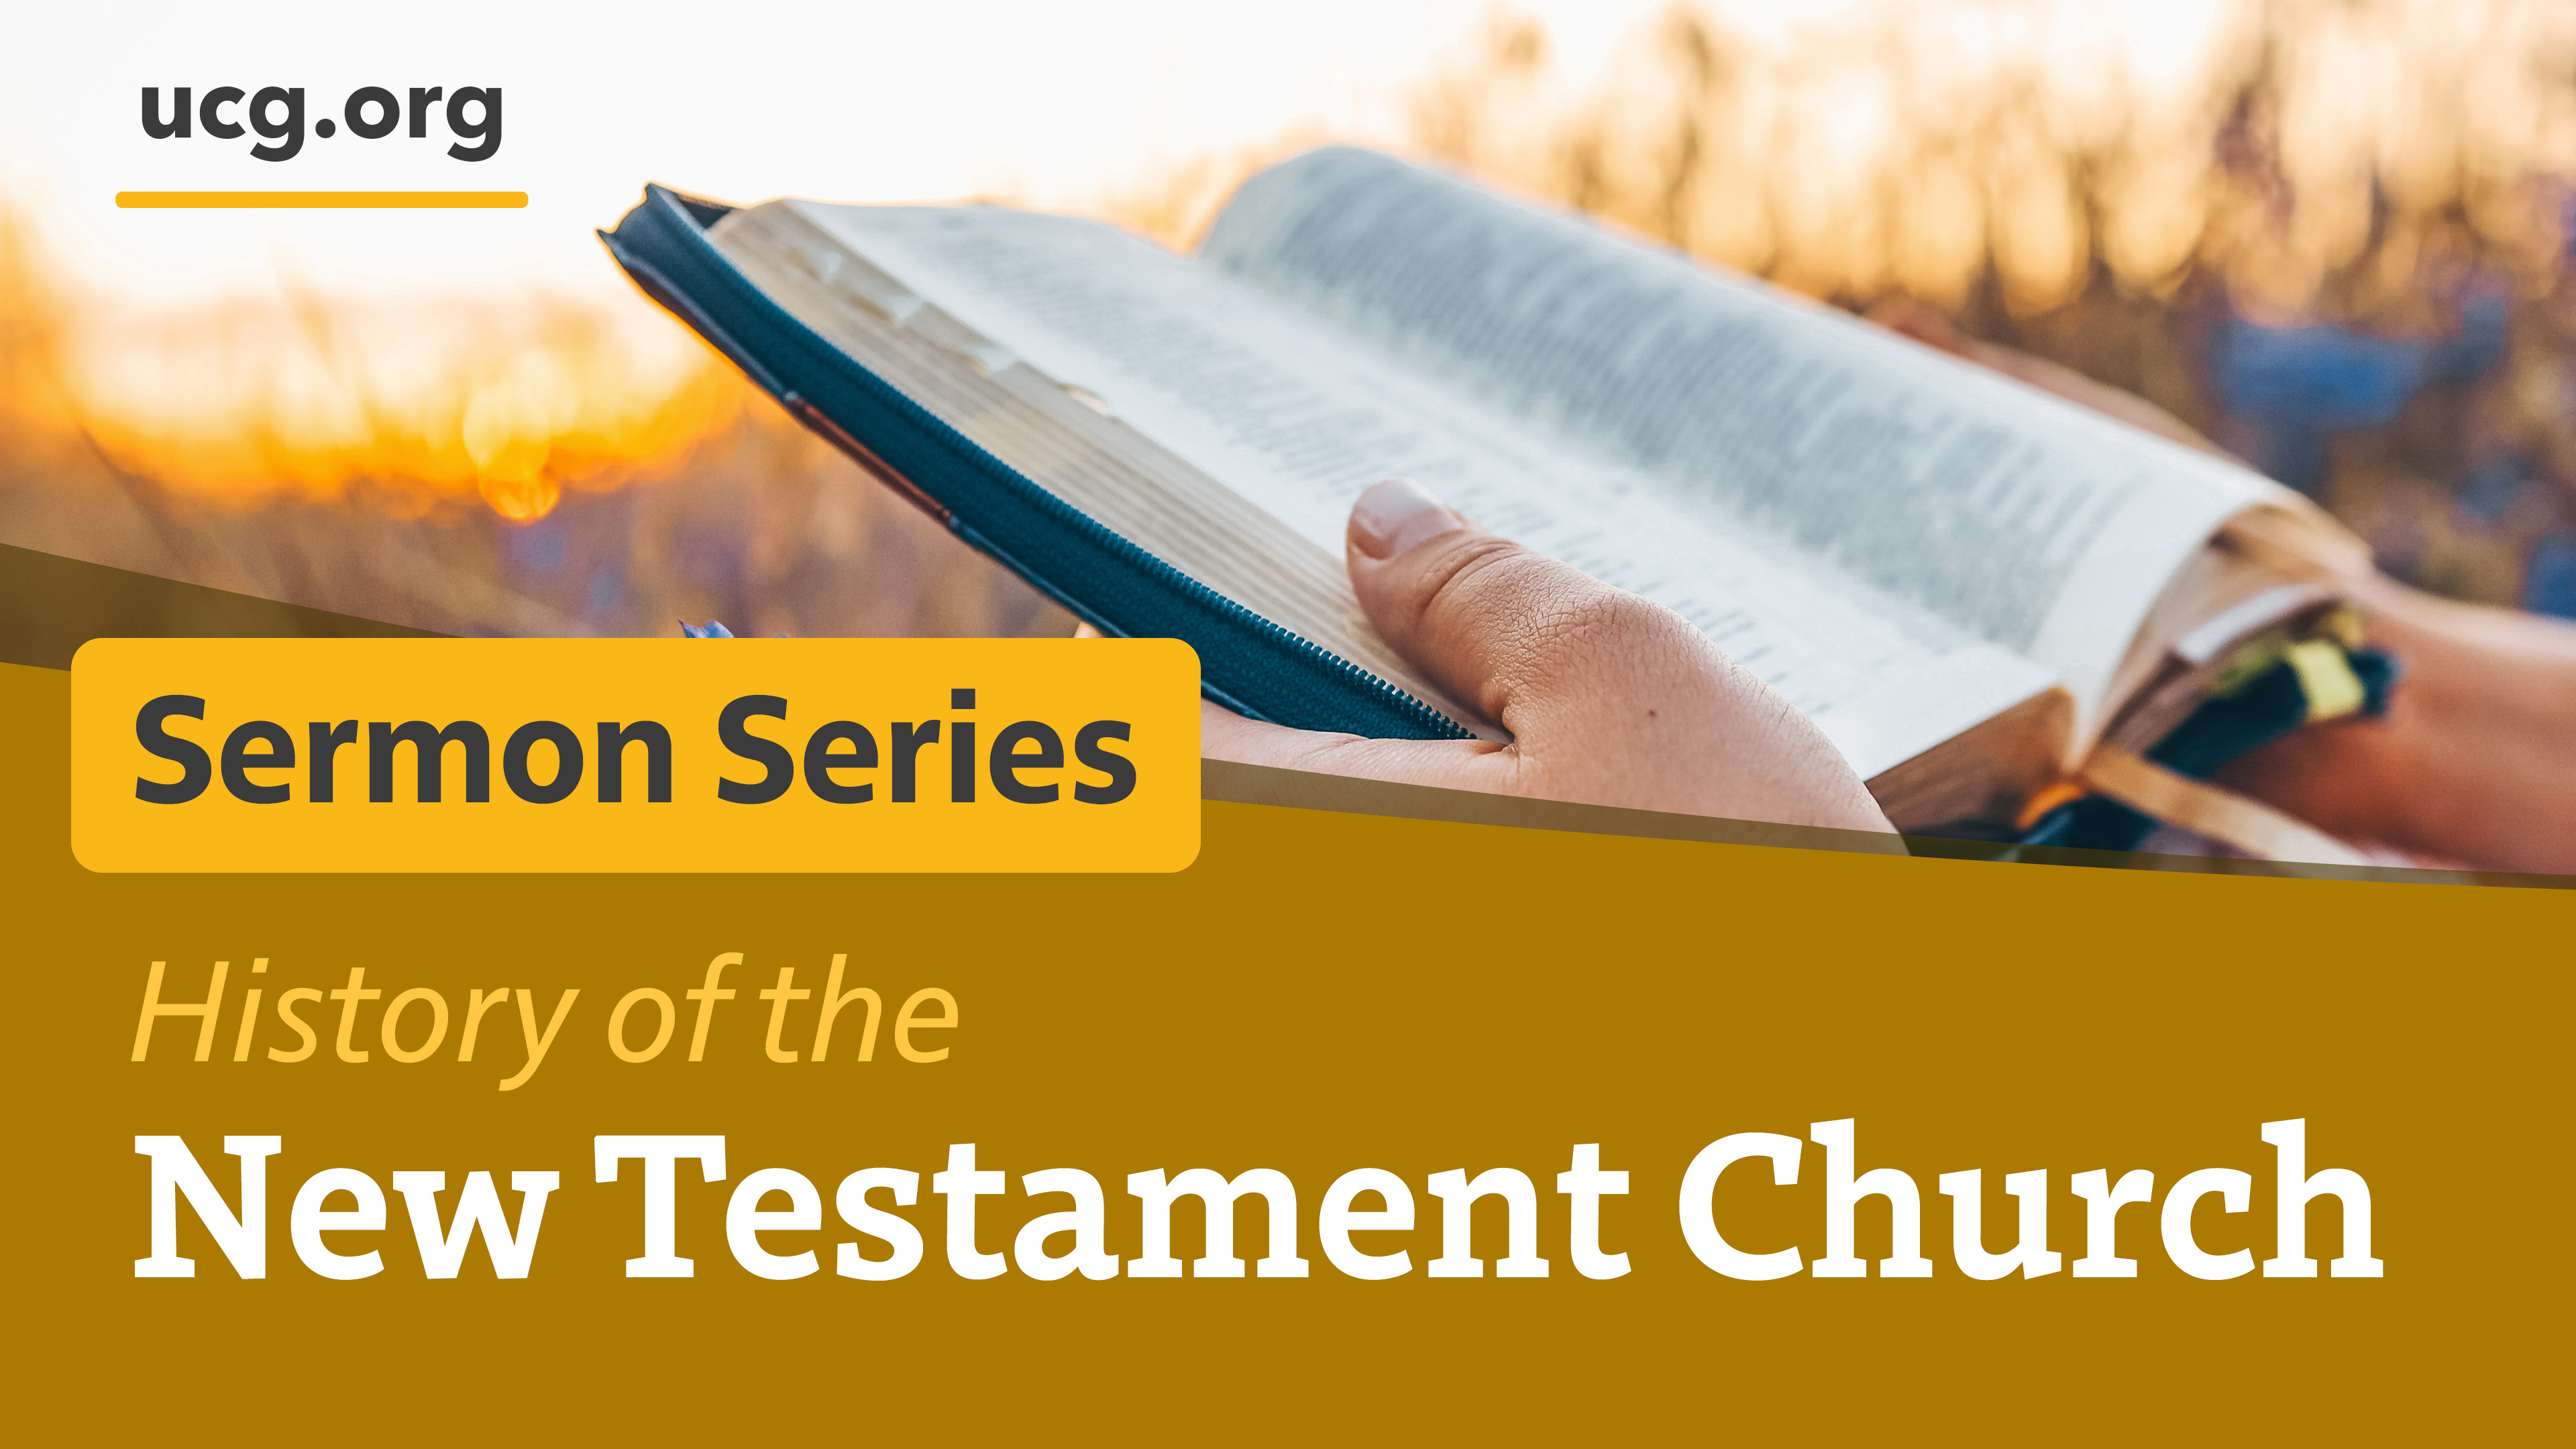 History of the New Testament Church series